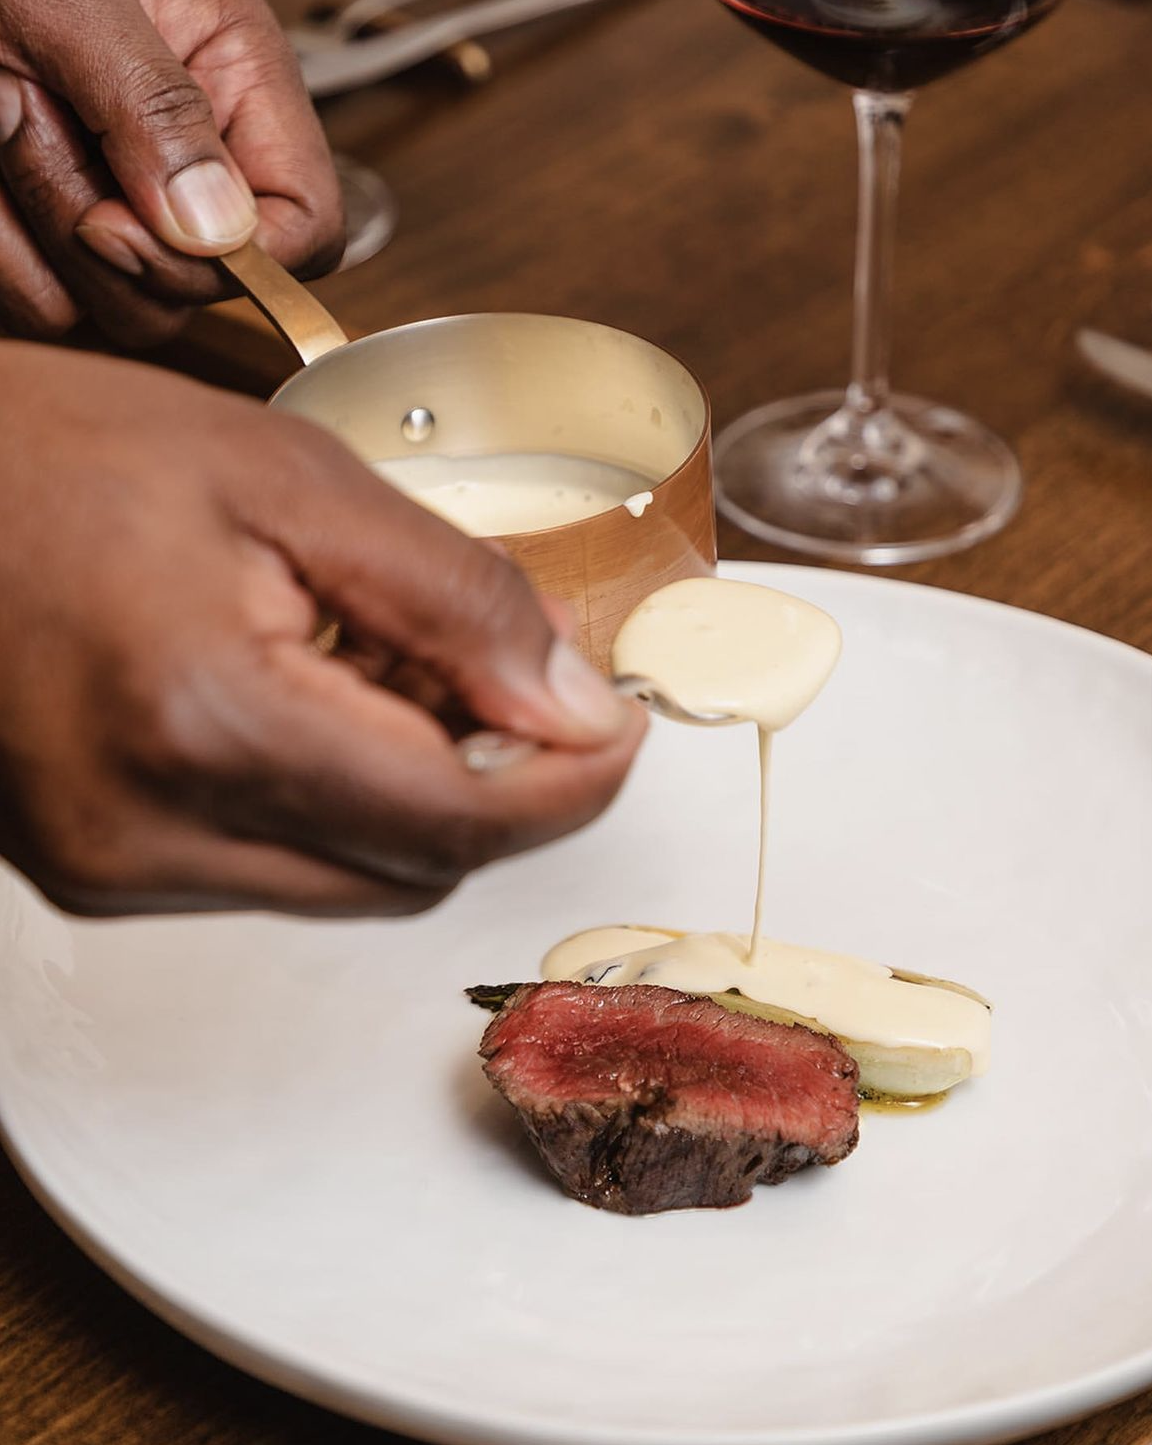 A chef plates a fin-dining steak dinner at Table Culture Provisions